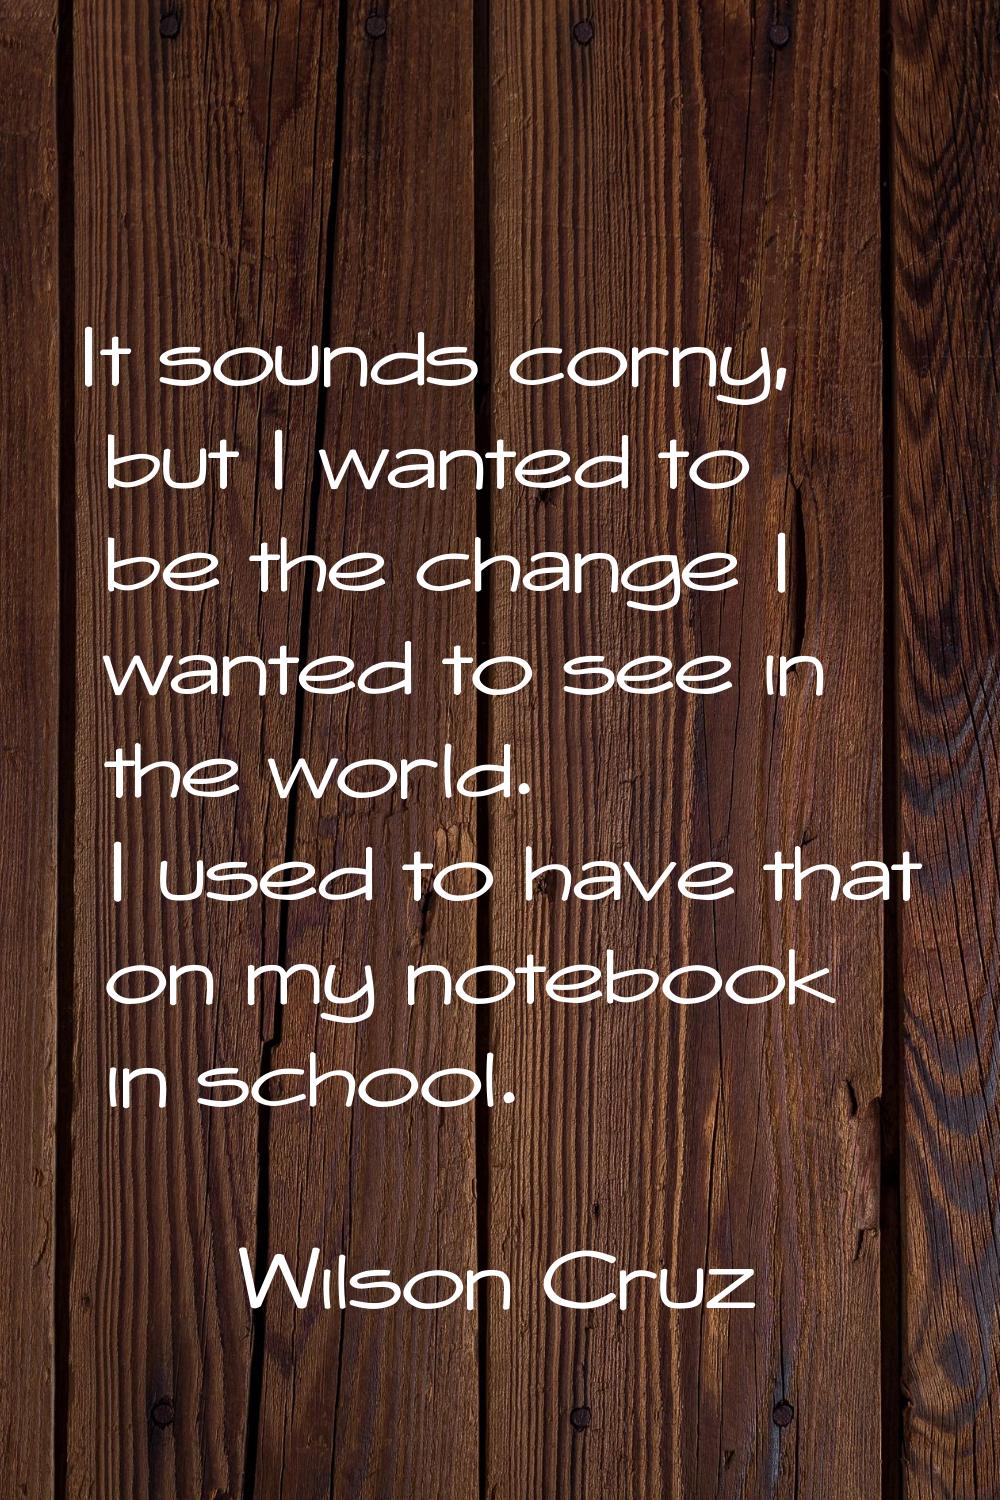 It sounds corny, but I wanted to be the change I wanted to see in the world. I used to have that on